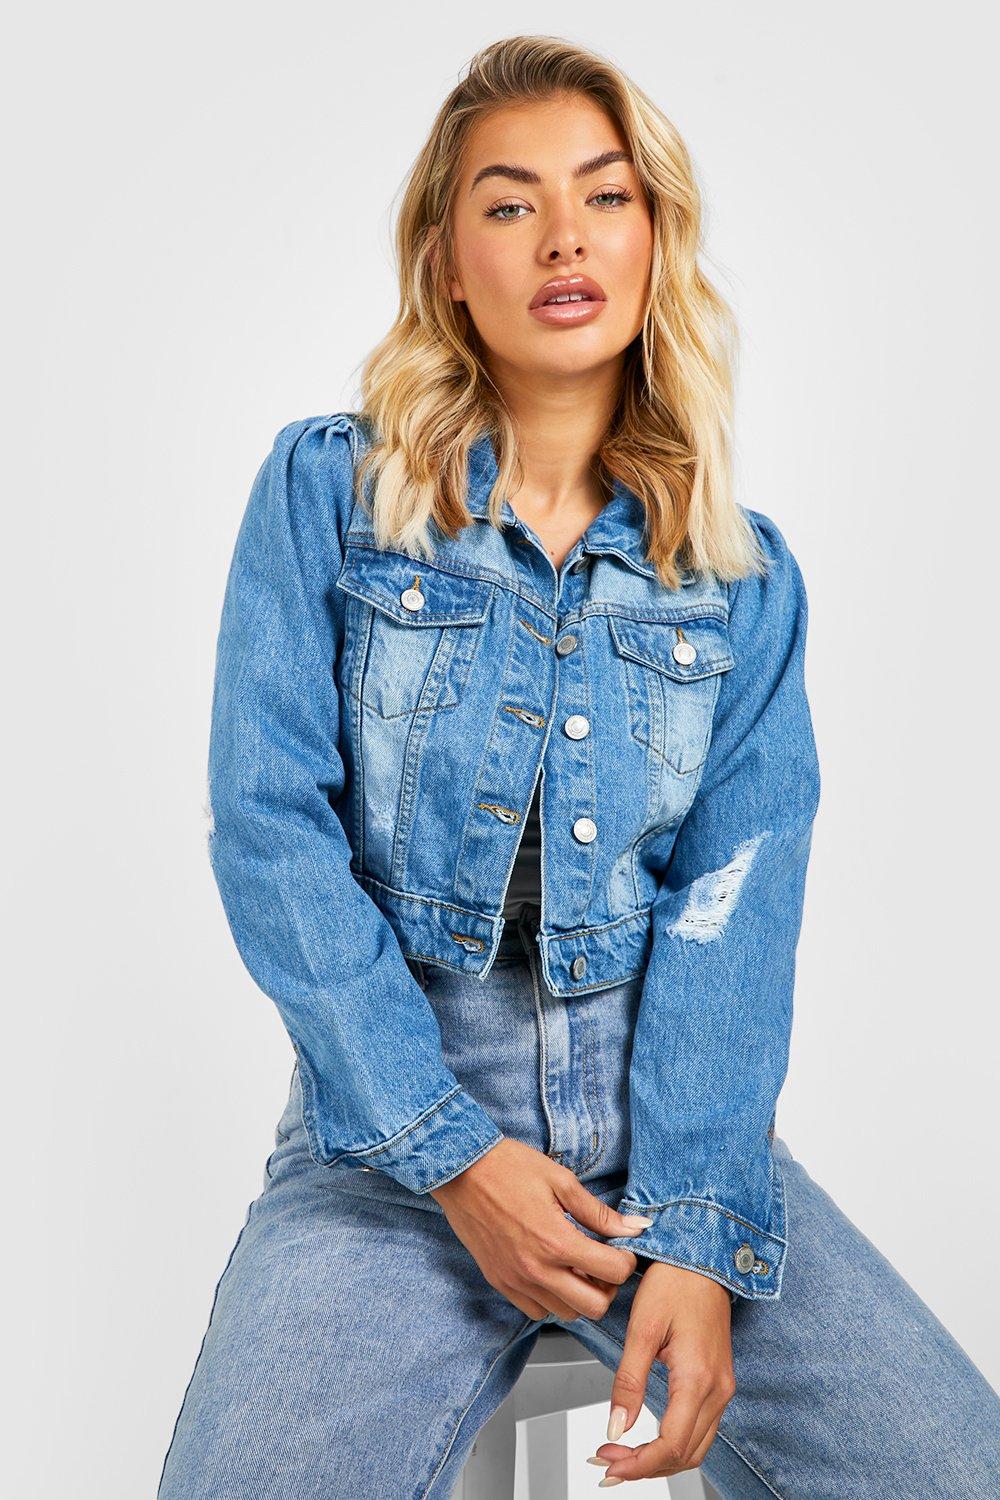 jean jacket with puff shoulders